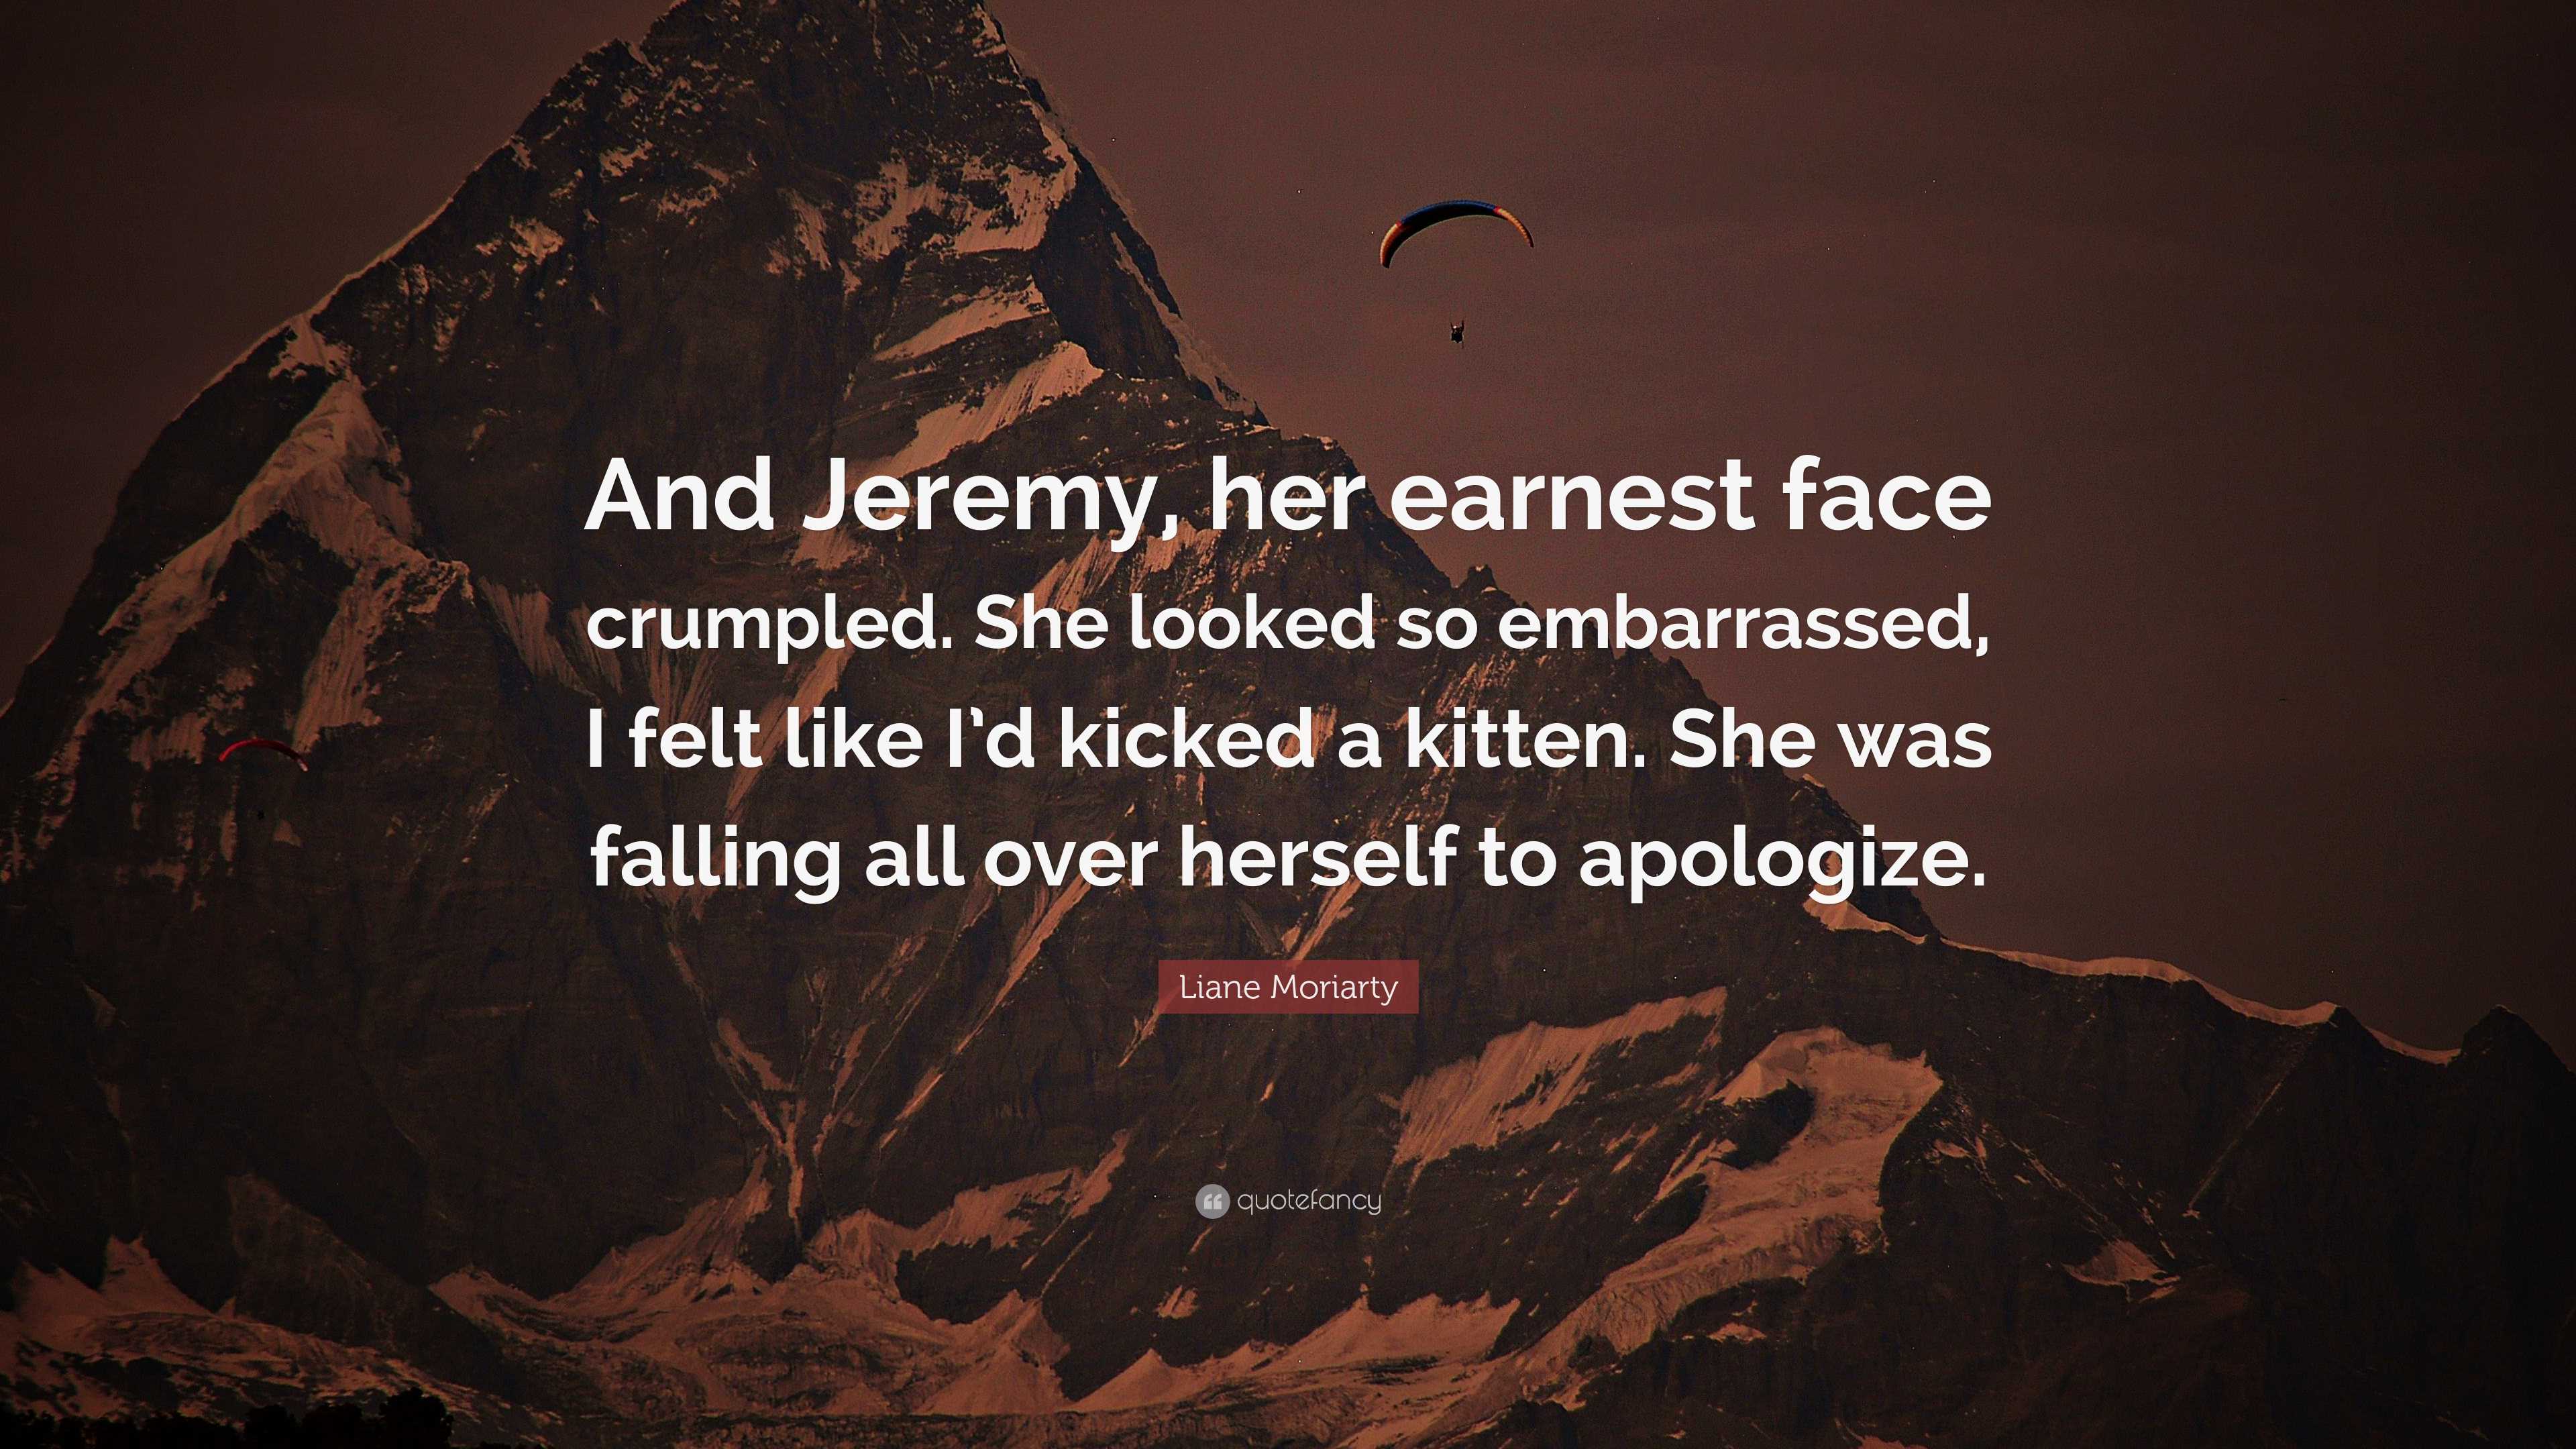 Liane Moriarty Quote: “And Jeremy, her earnest face crumpled. She ...